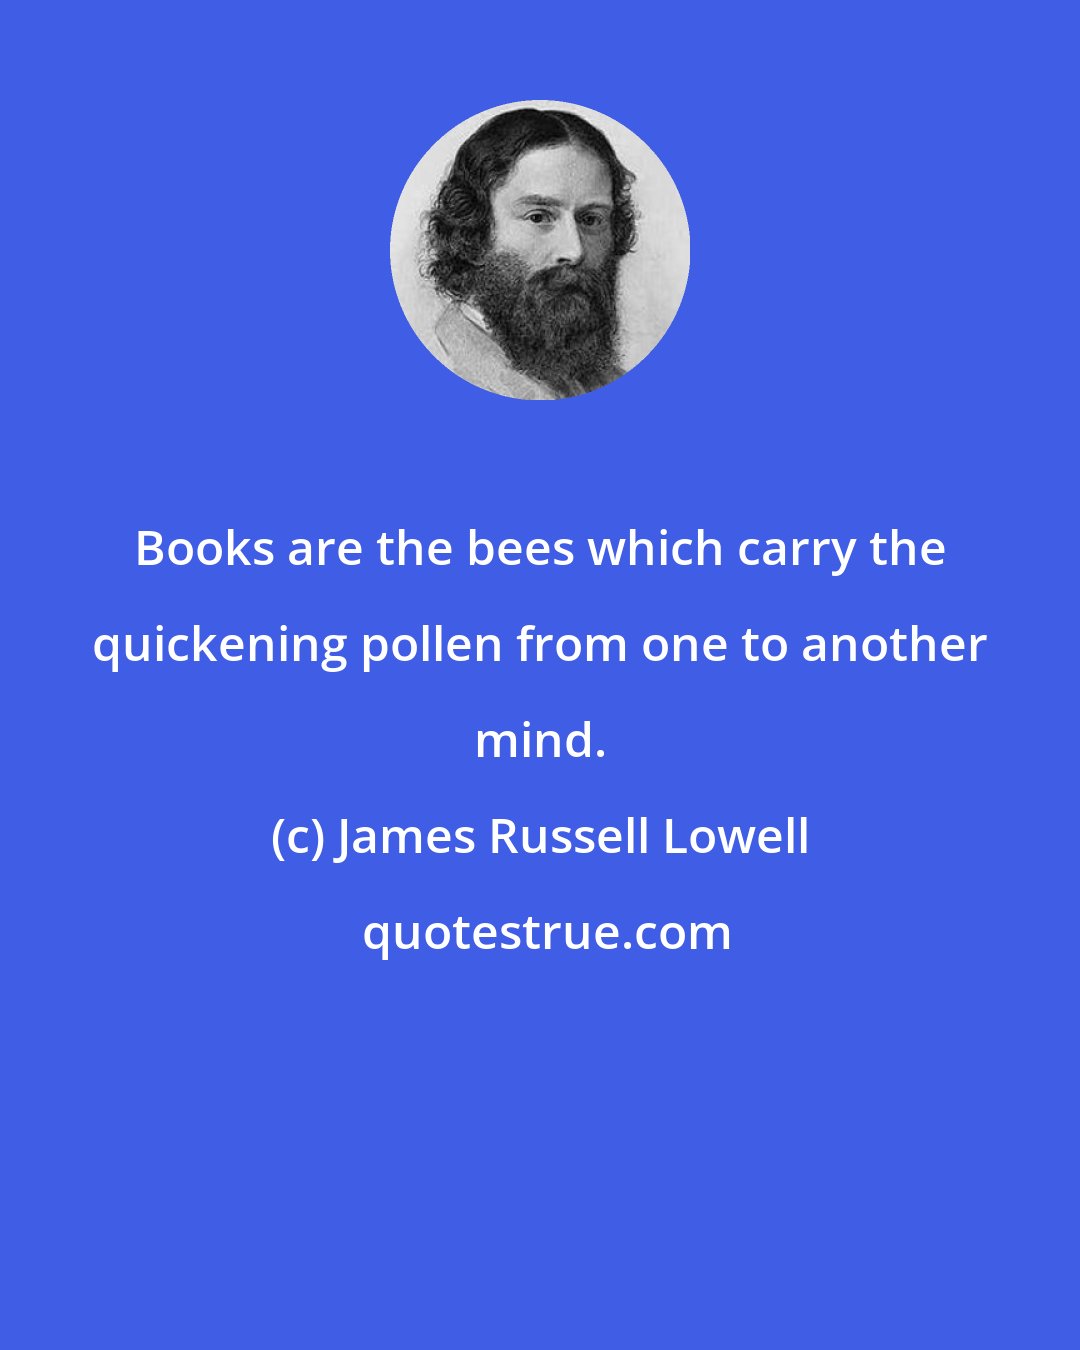 James Russell Lowell: Books are the bees which carry the quickening pollen from one to another mind.